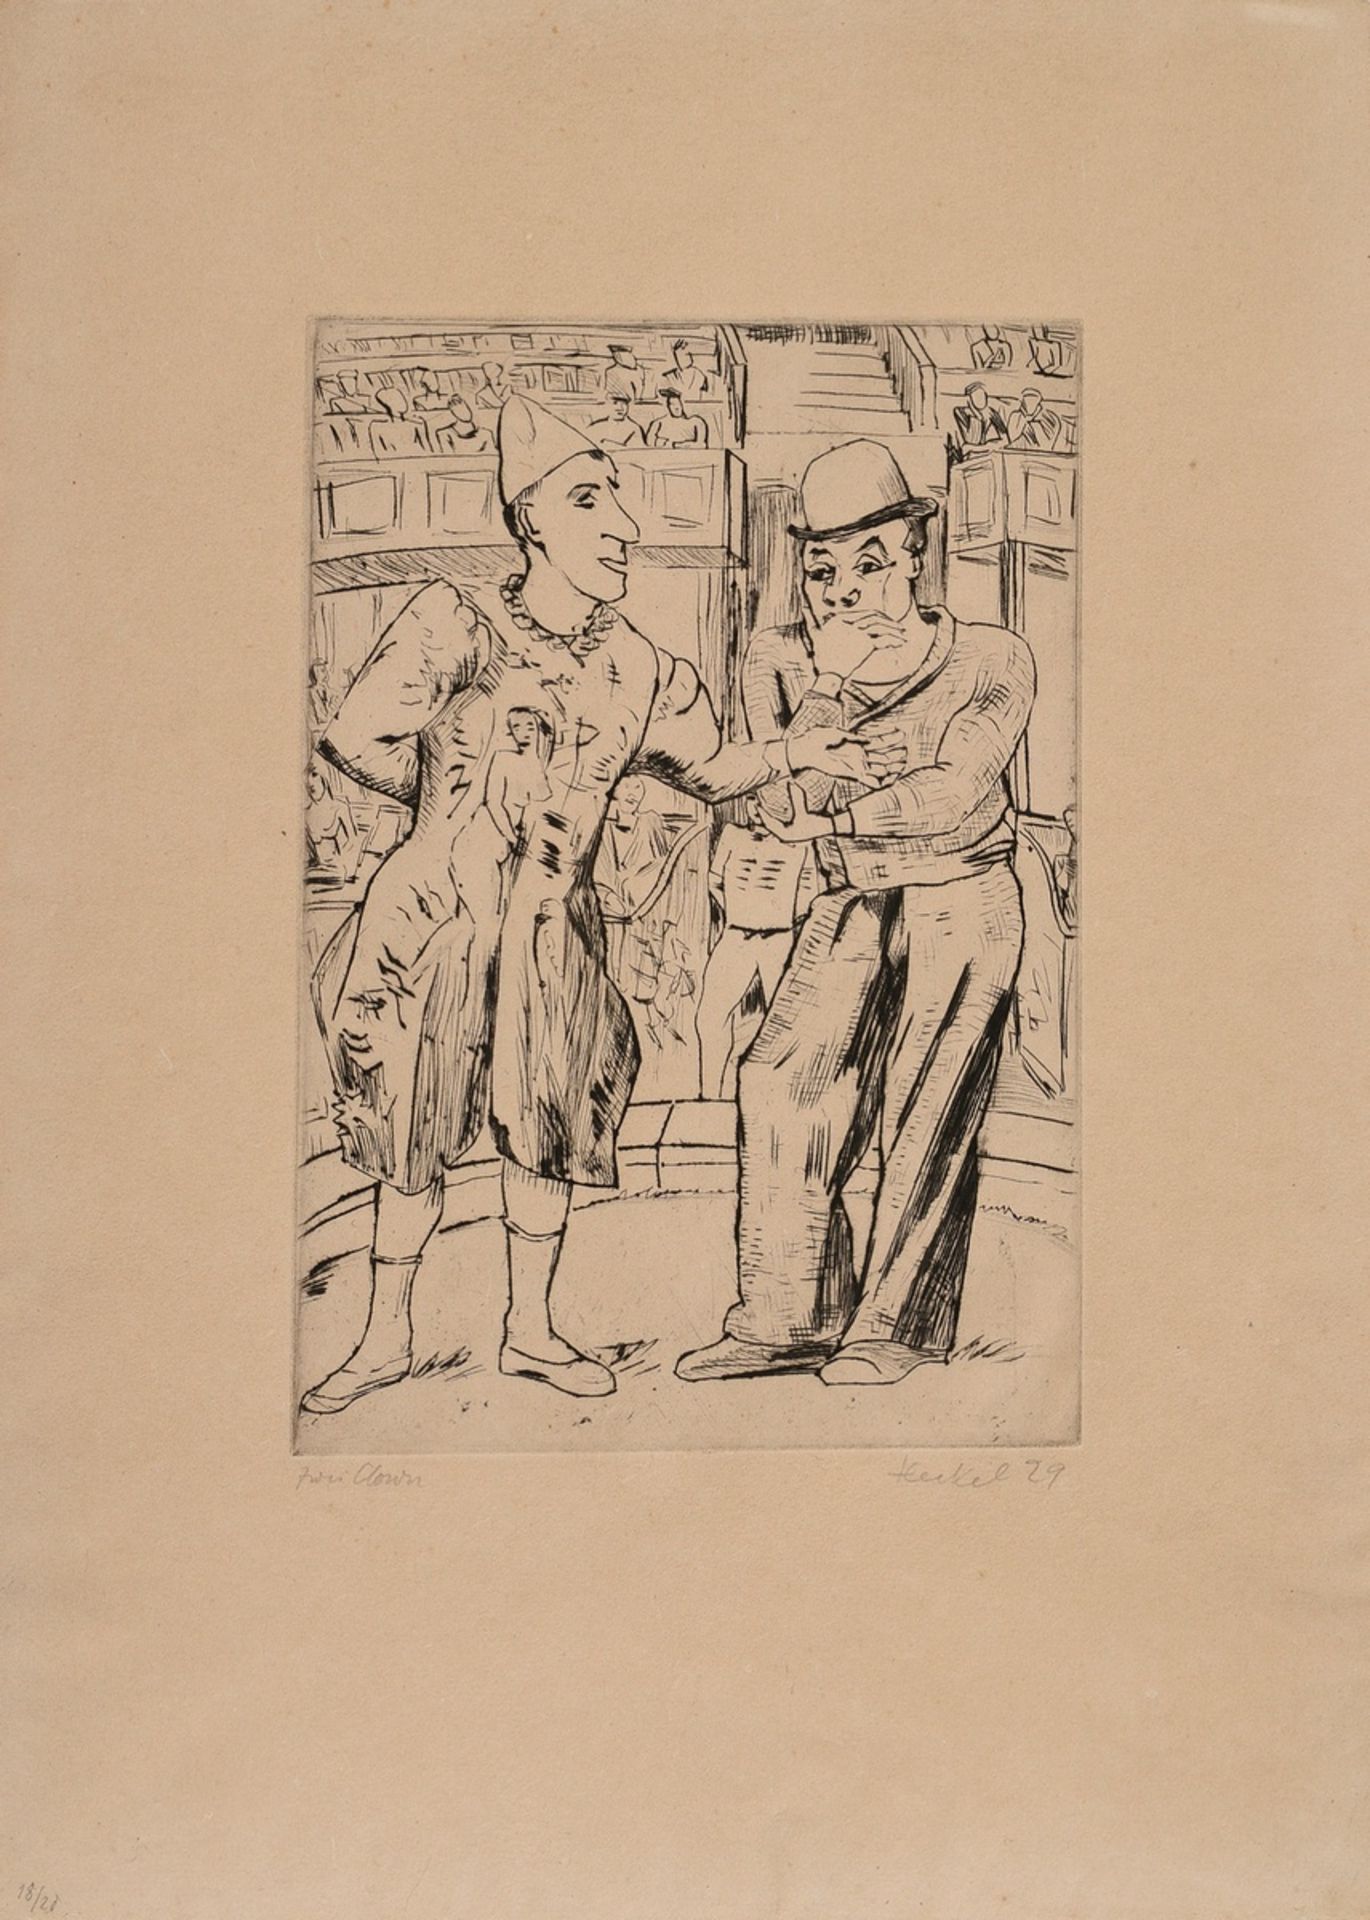 Heckel, Erich (1883-1970) 'Two Clowns' 1929, etching, 18/20, sign./dat./titl./num. below, PM 27x18. - Image 2 of 3